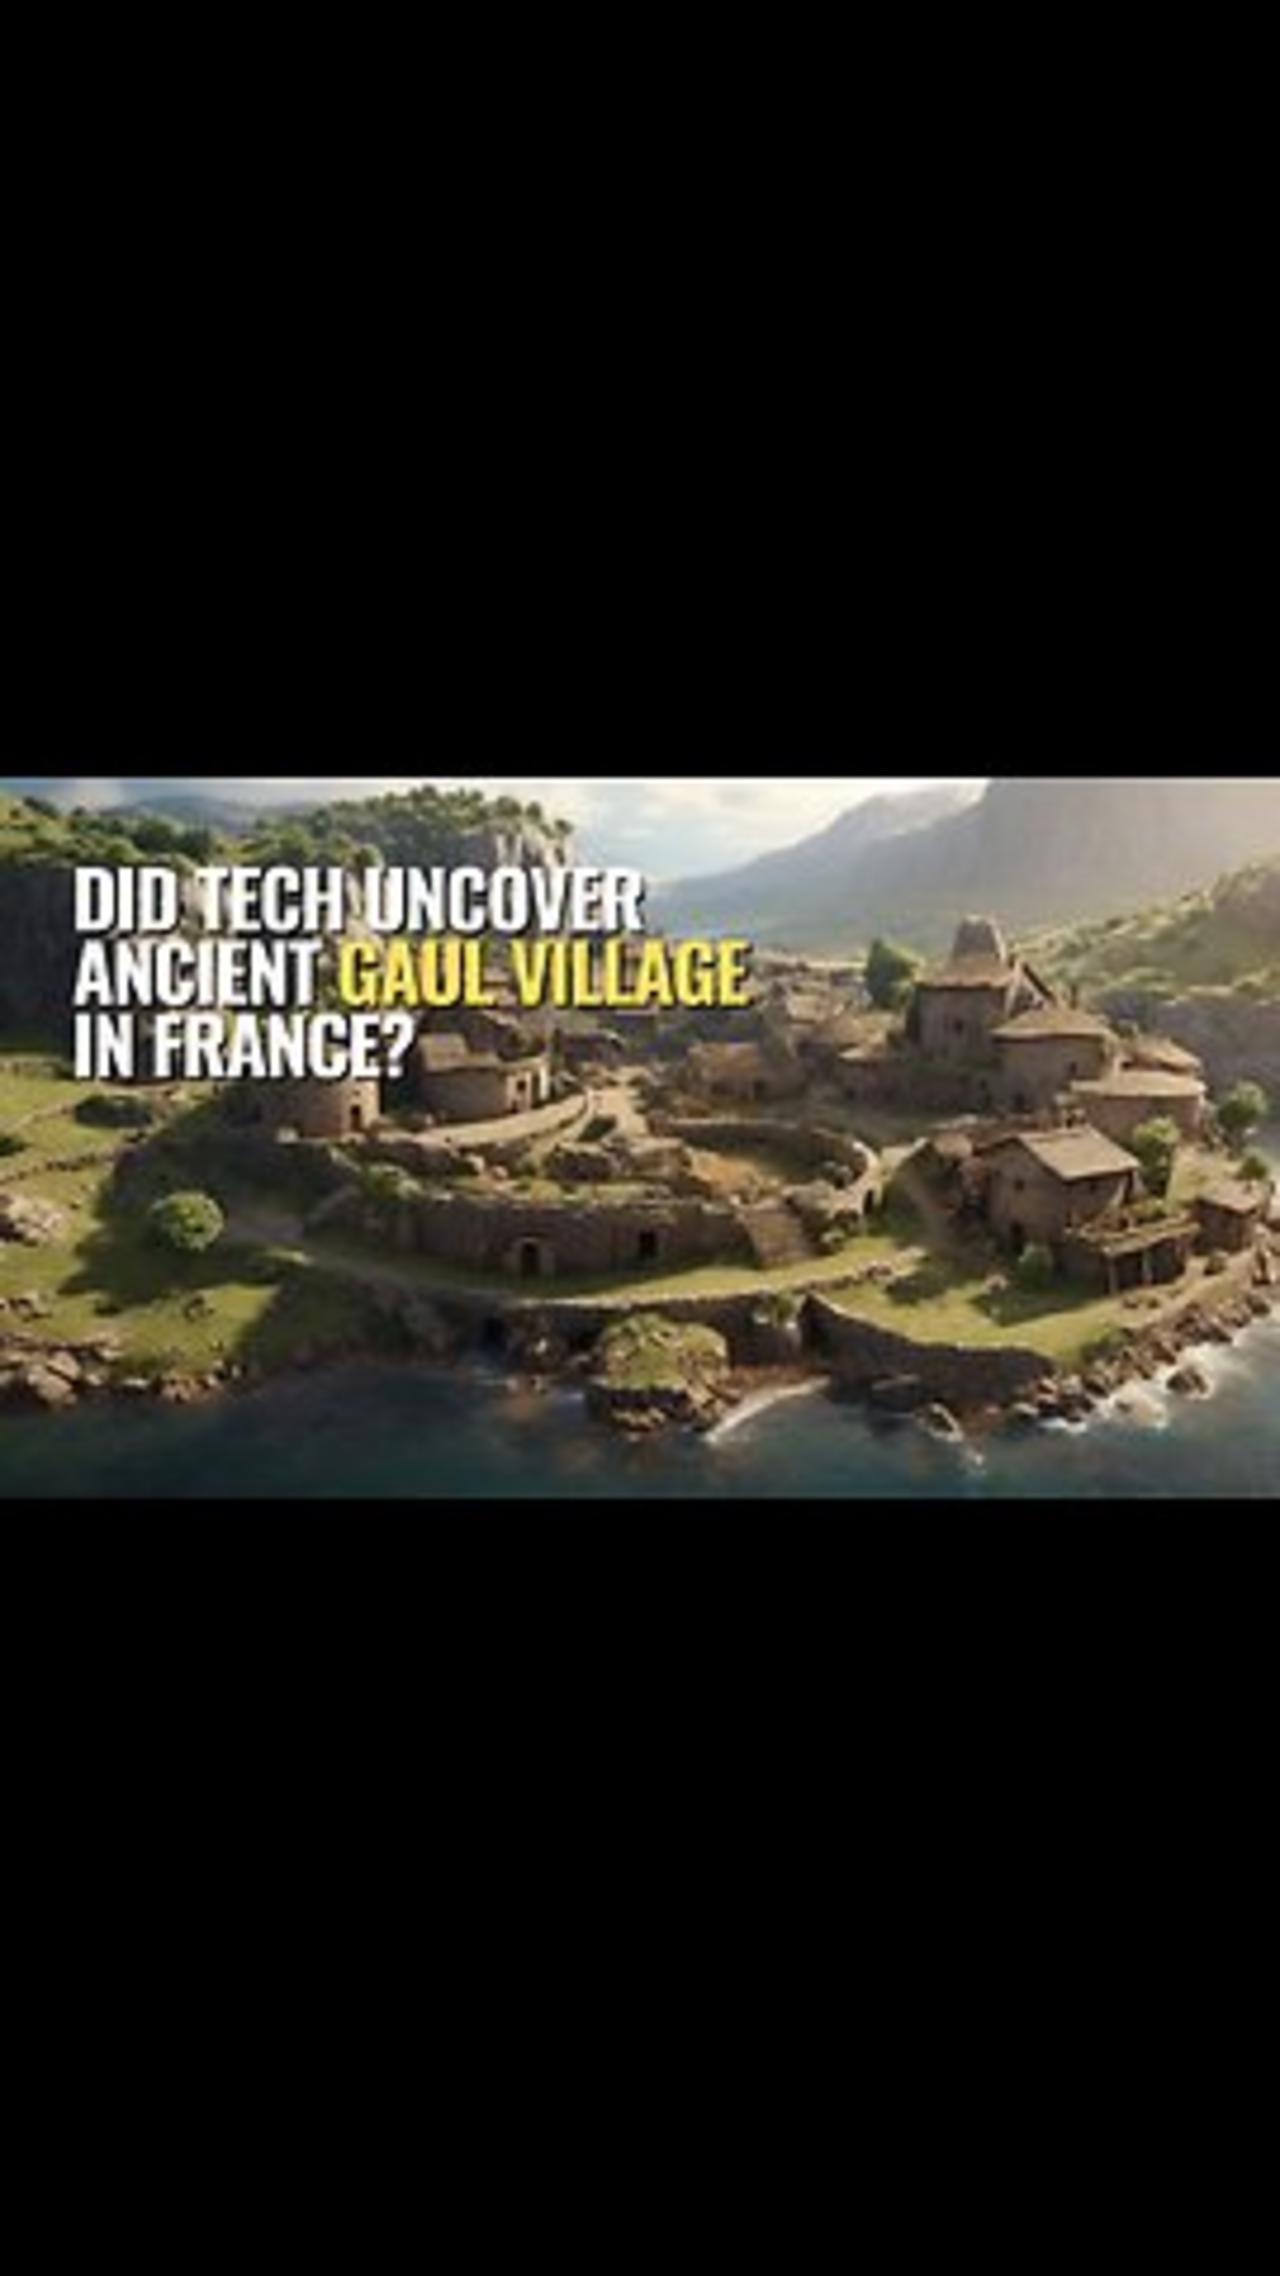 Did Tech Uncover Ancient Gaul Village in France?